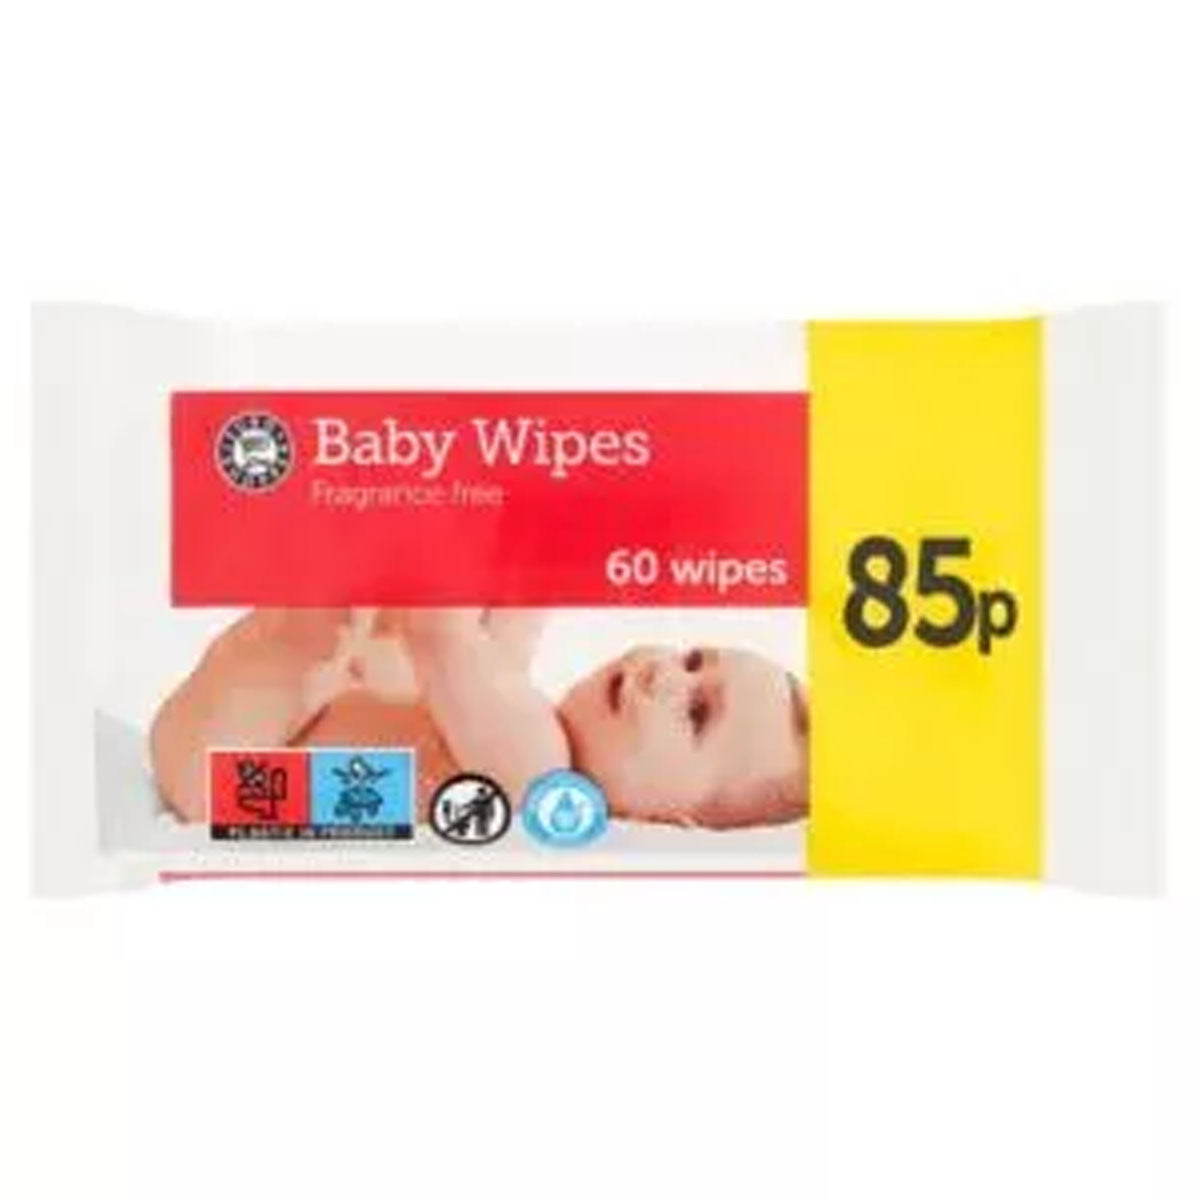 Euro Shopper - Baby Wipes - 60 wipes - Continental Food Store